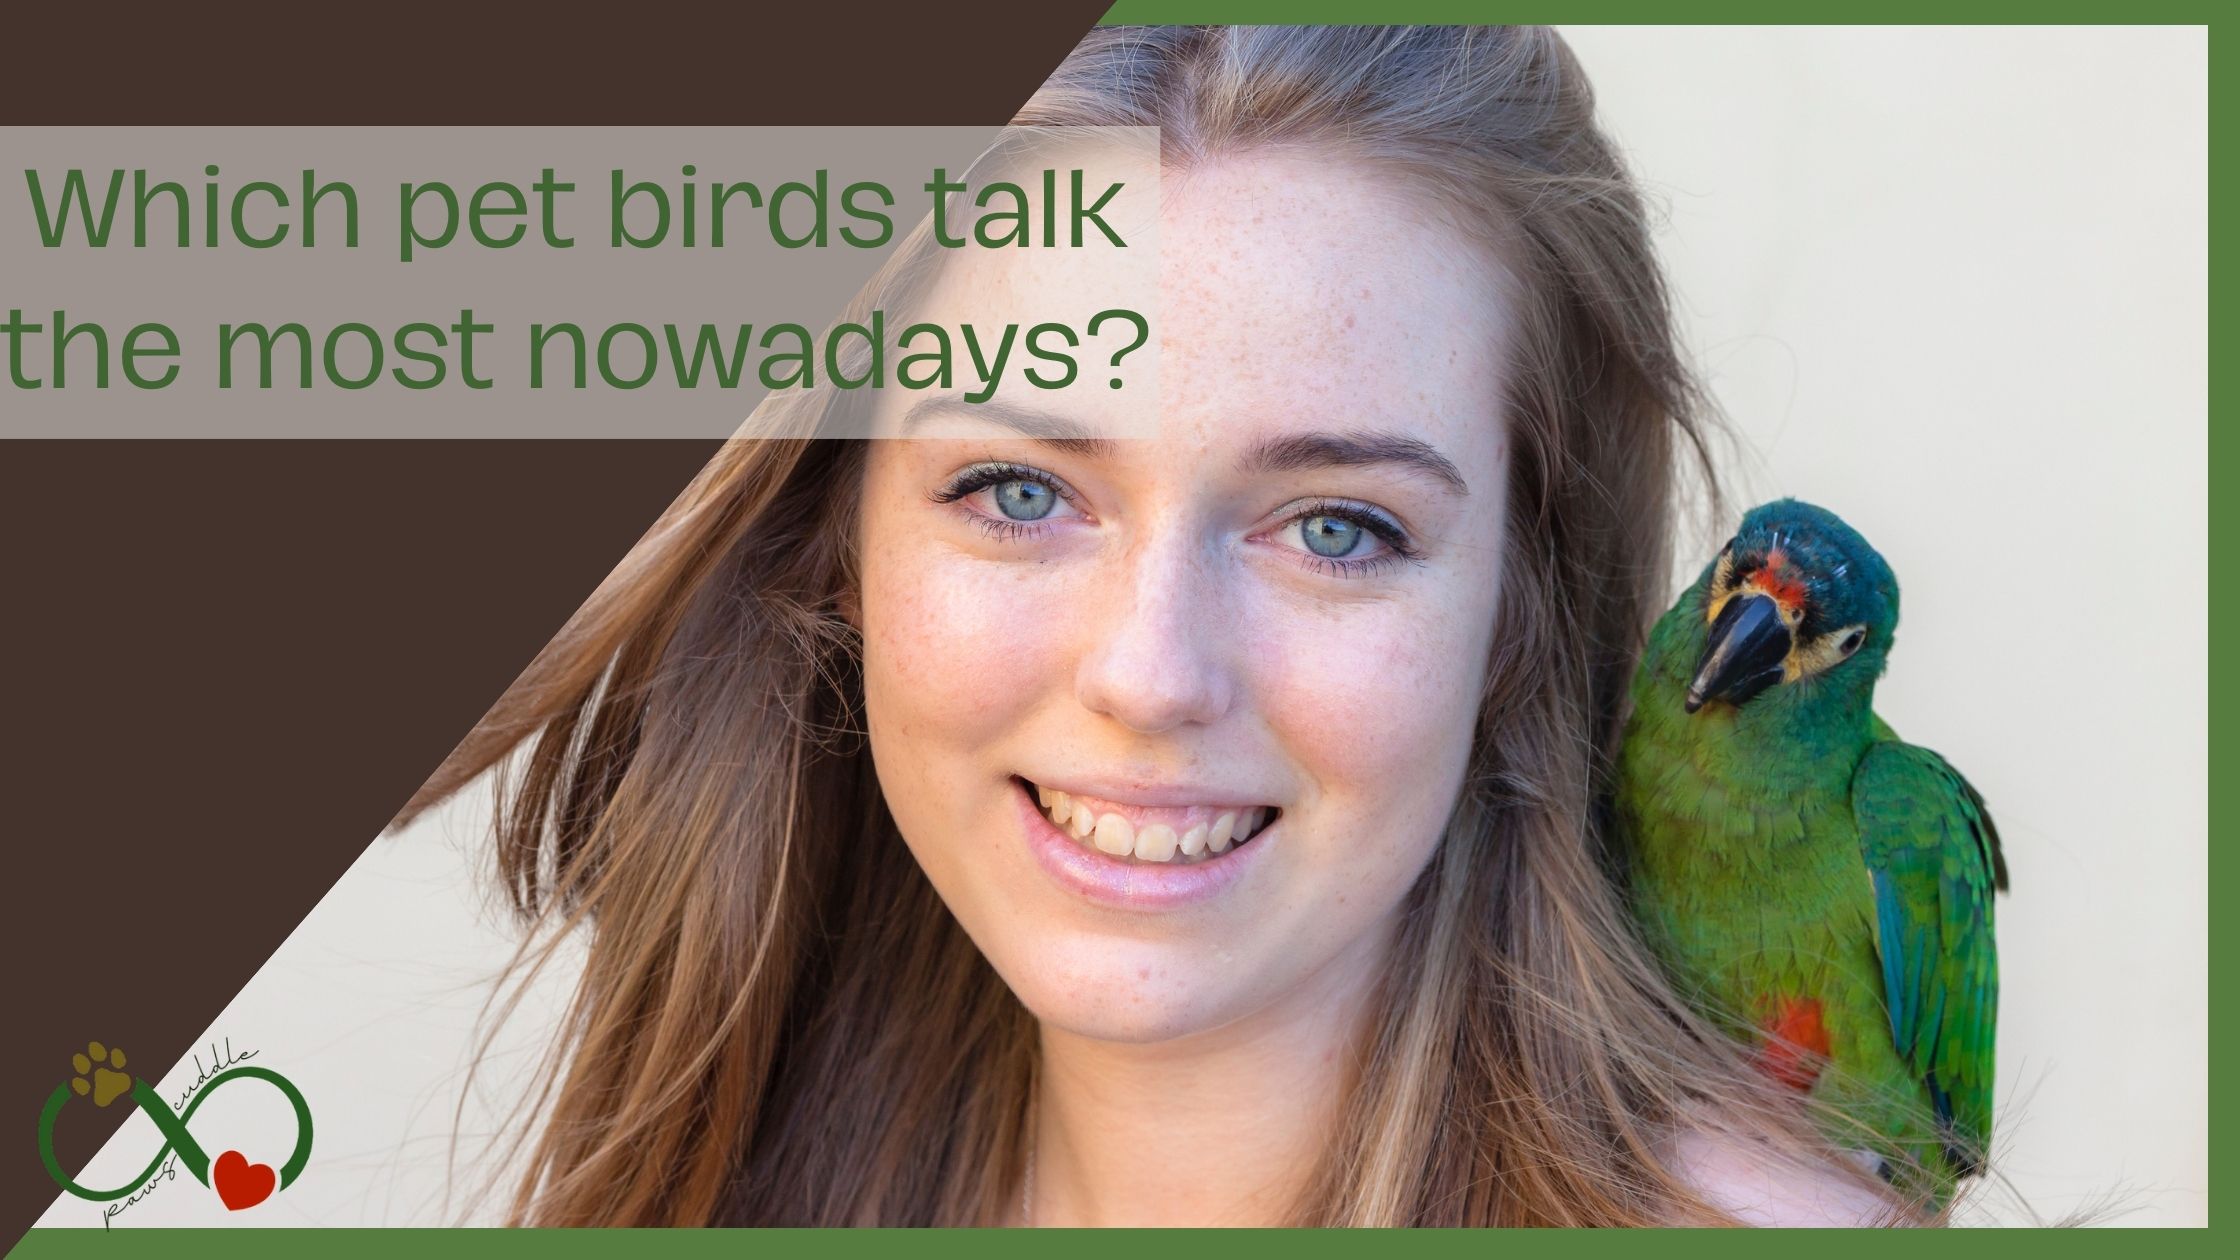 Which pet birds talk the most nowadays?